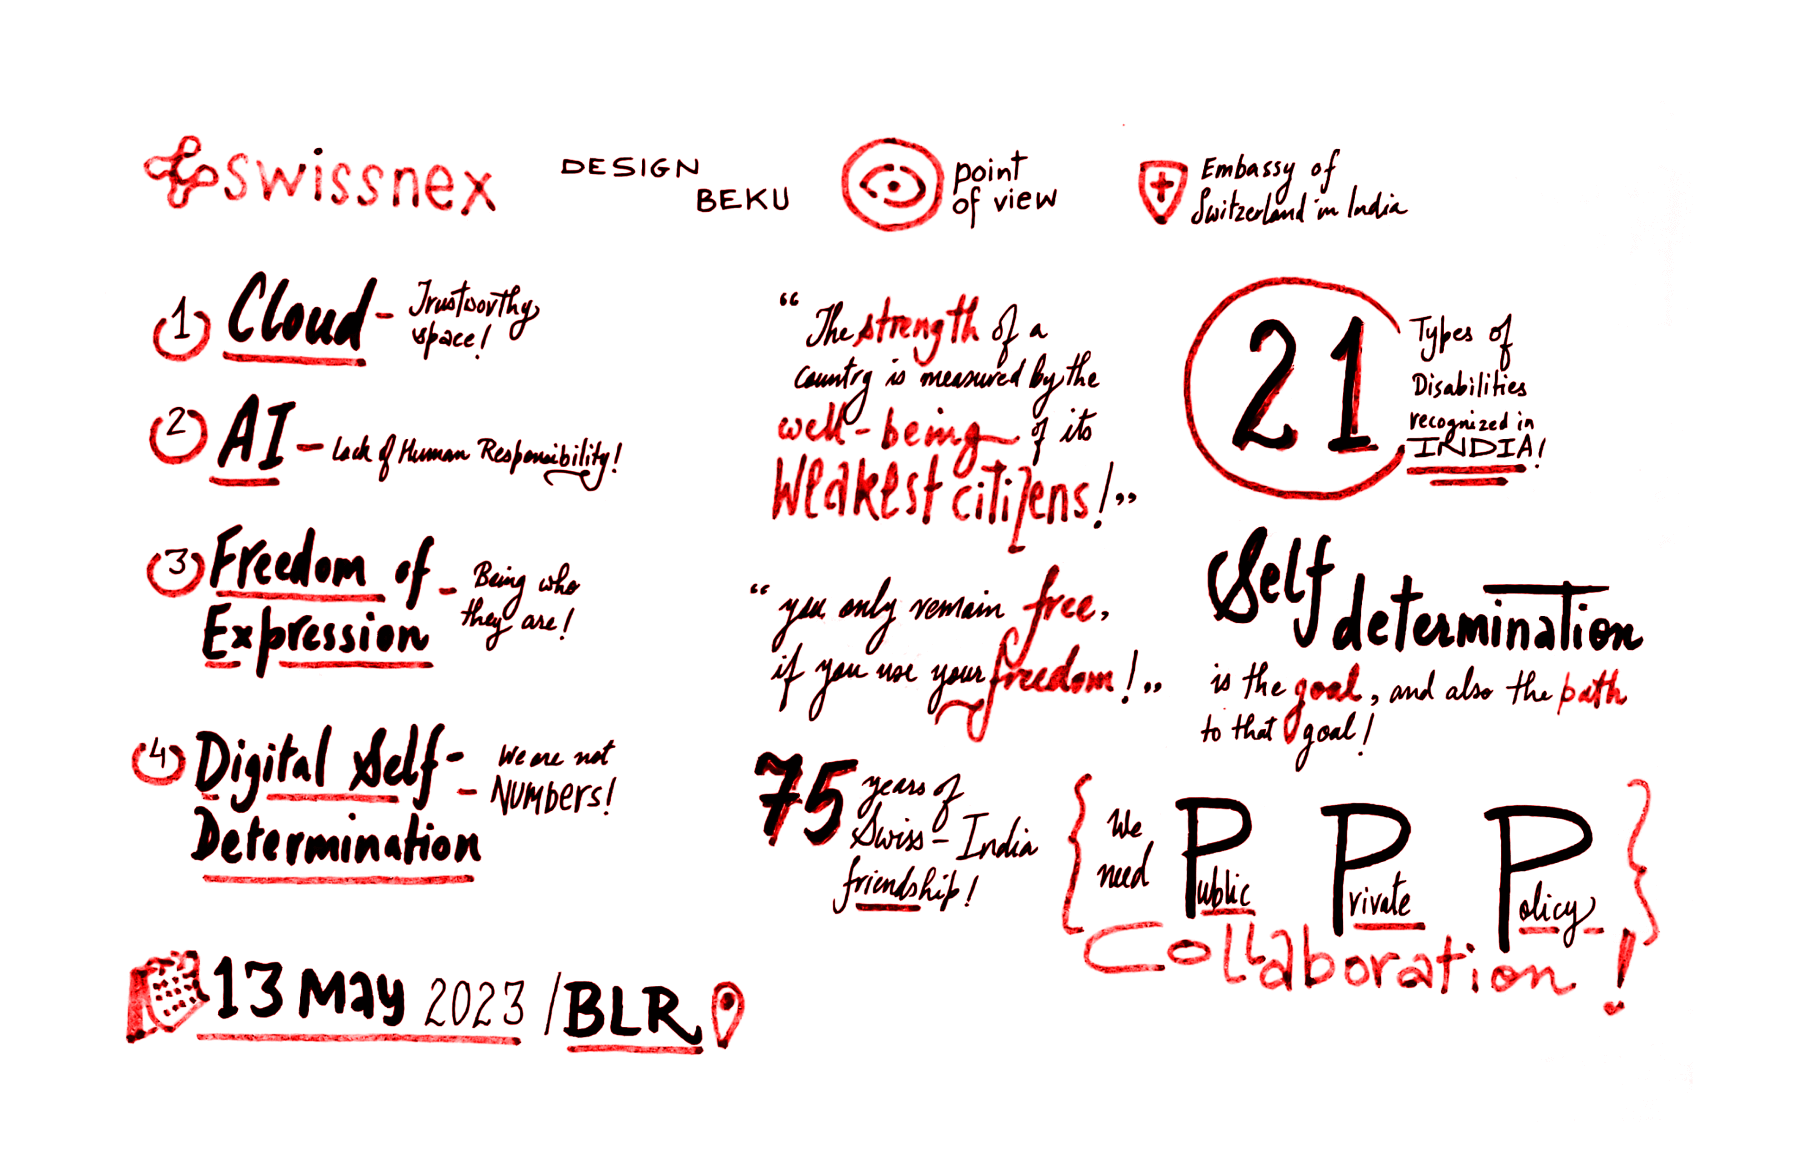 Sketchnote of Olivier speaking about Swiss focus areas (Cloud, AI, Freedom of Expression, Digital Self-determination)